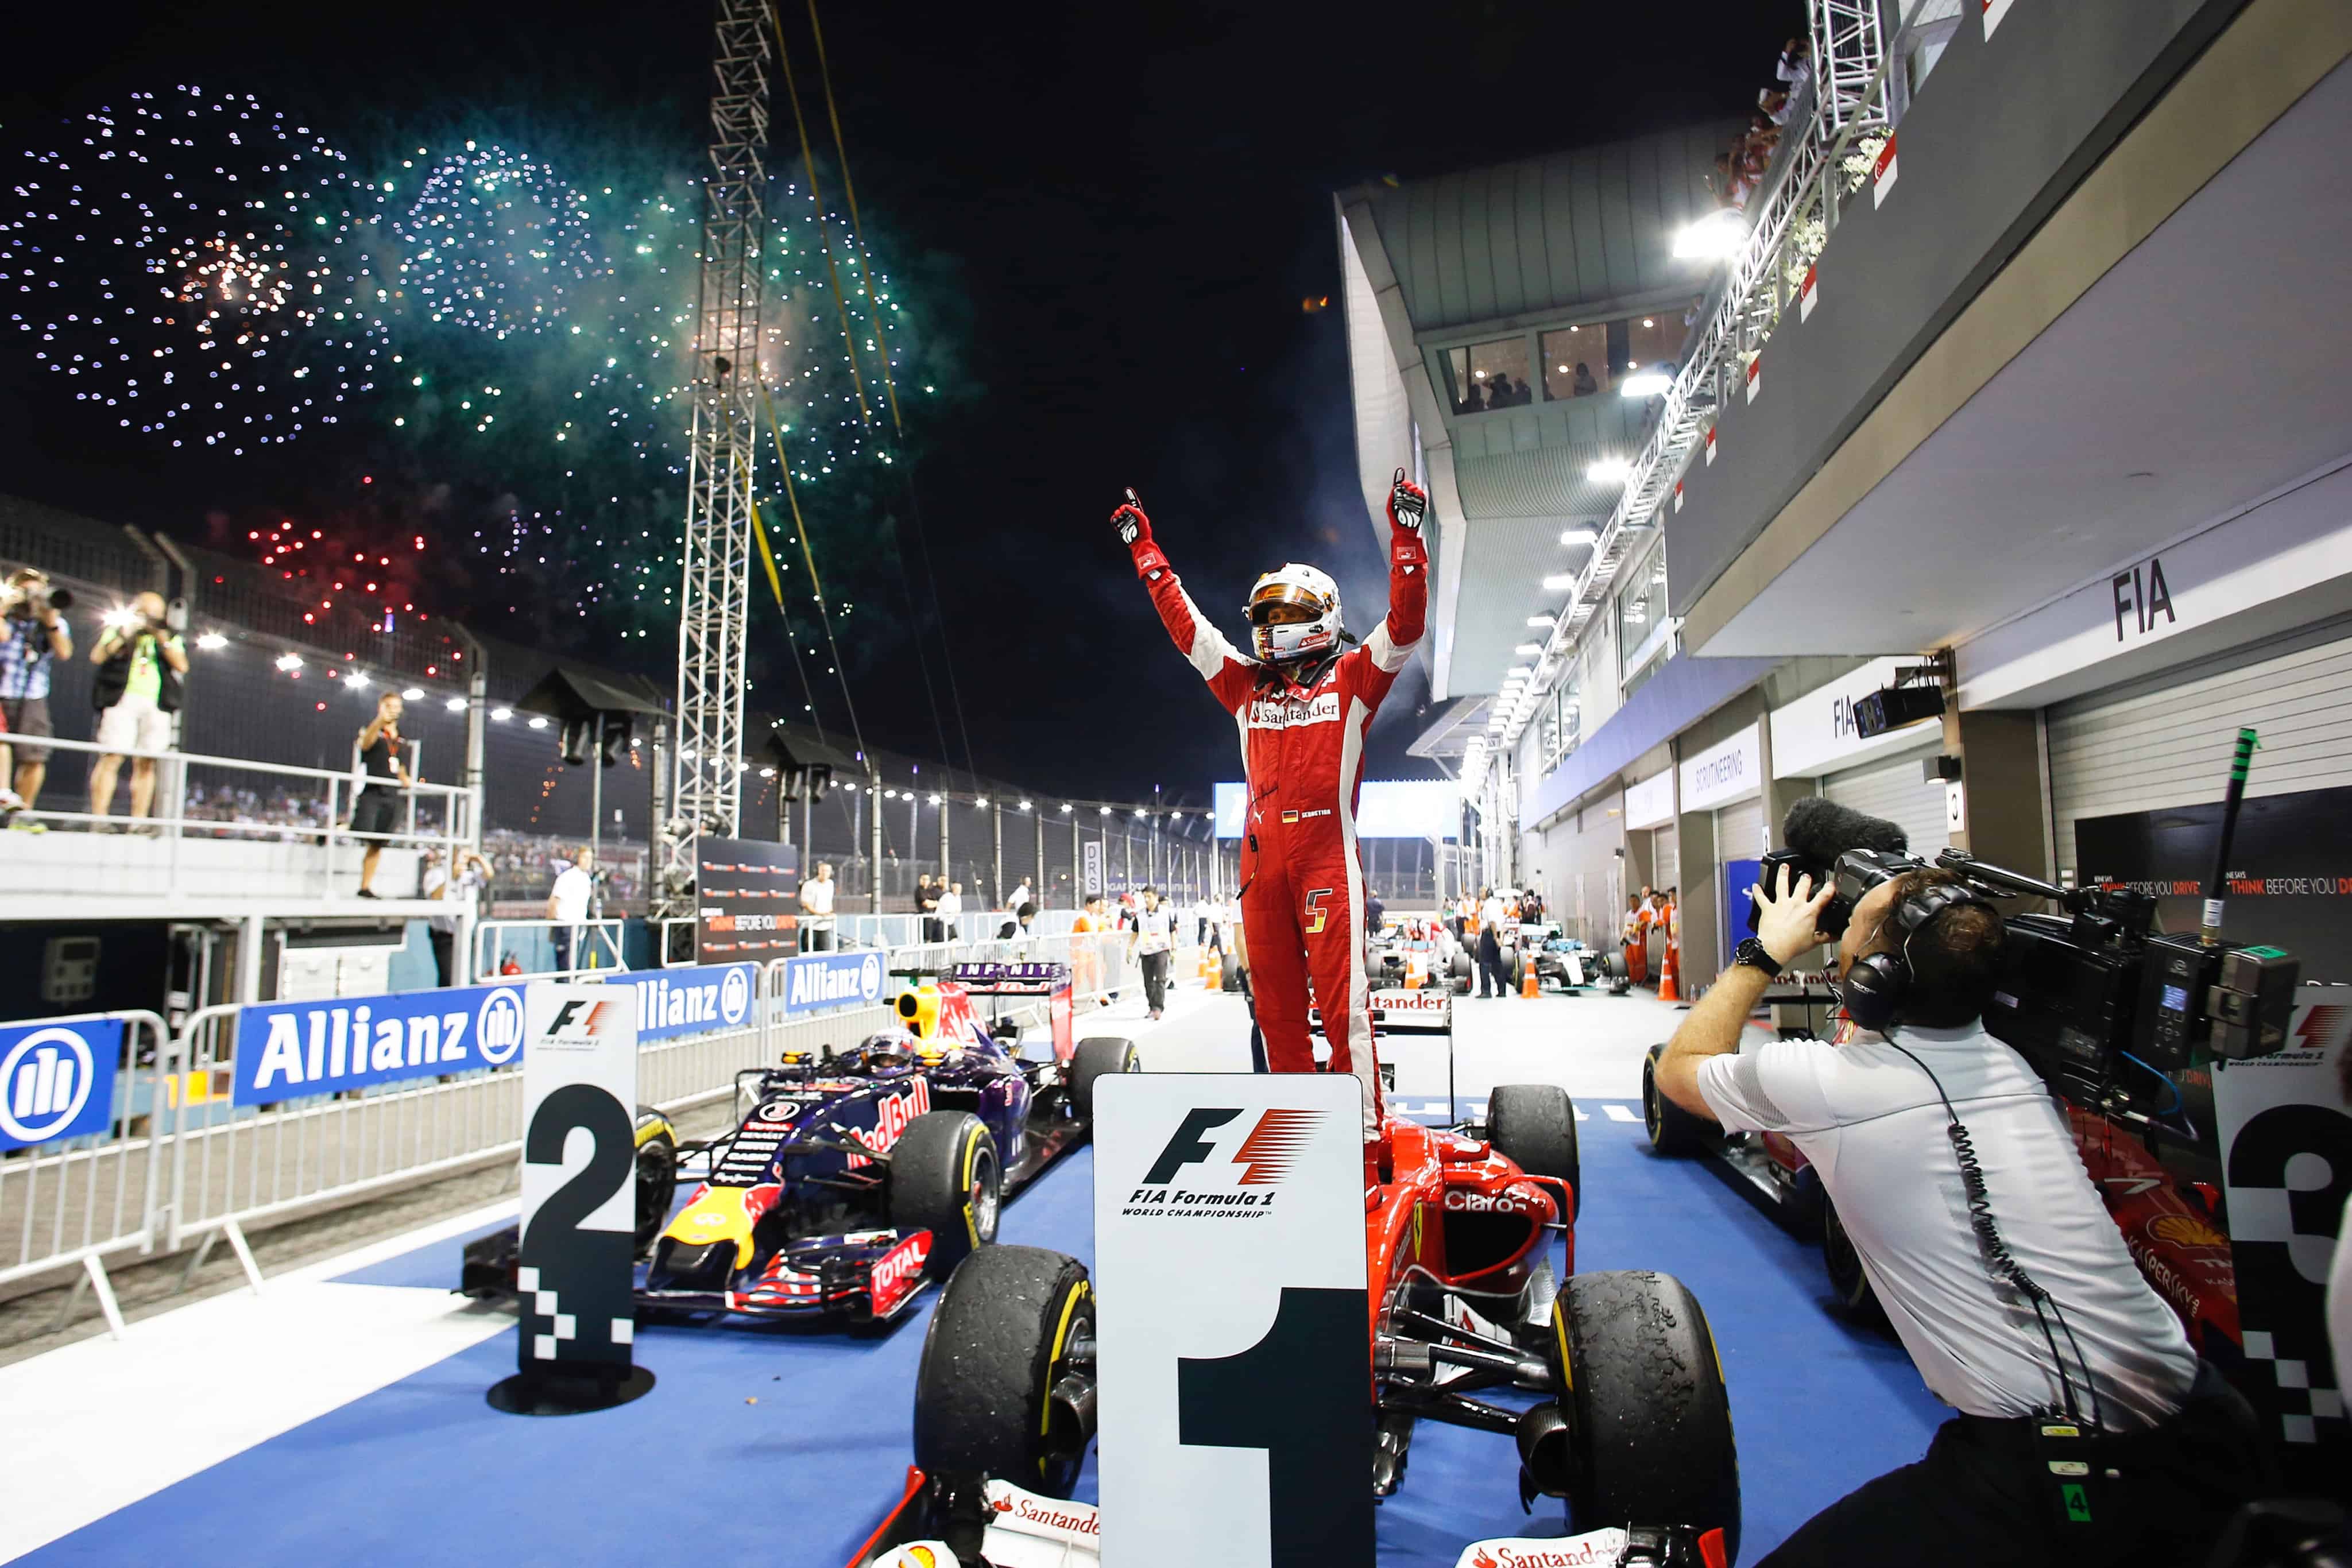 Good News For Singapore F1 Fans! Grand Prix Is Here To Stay